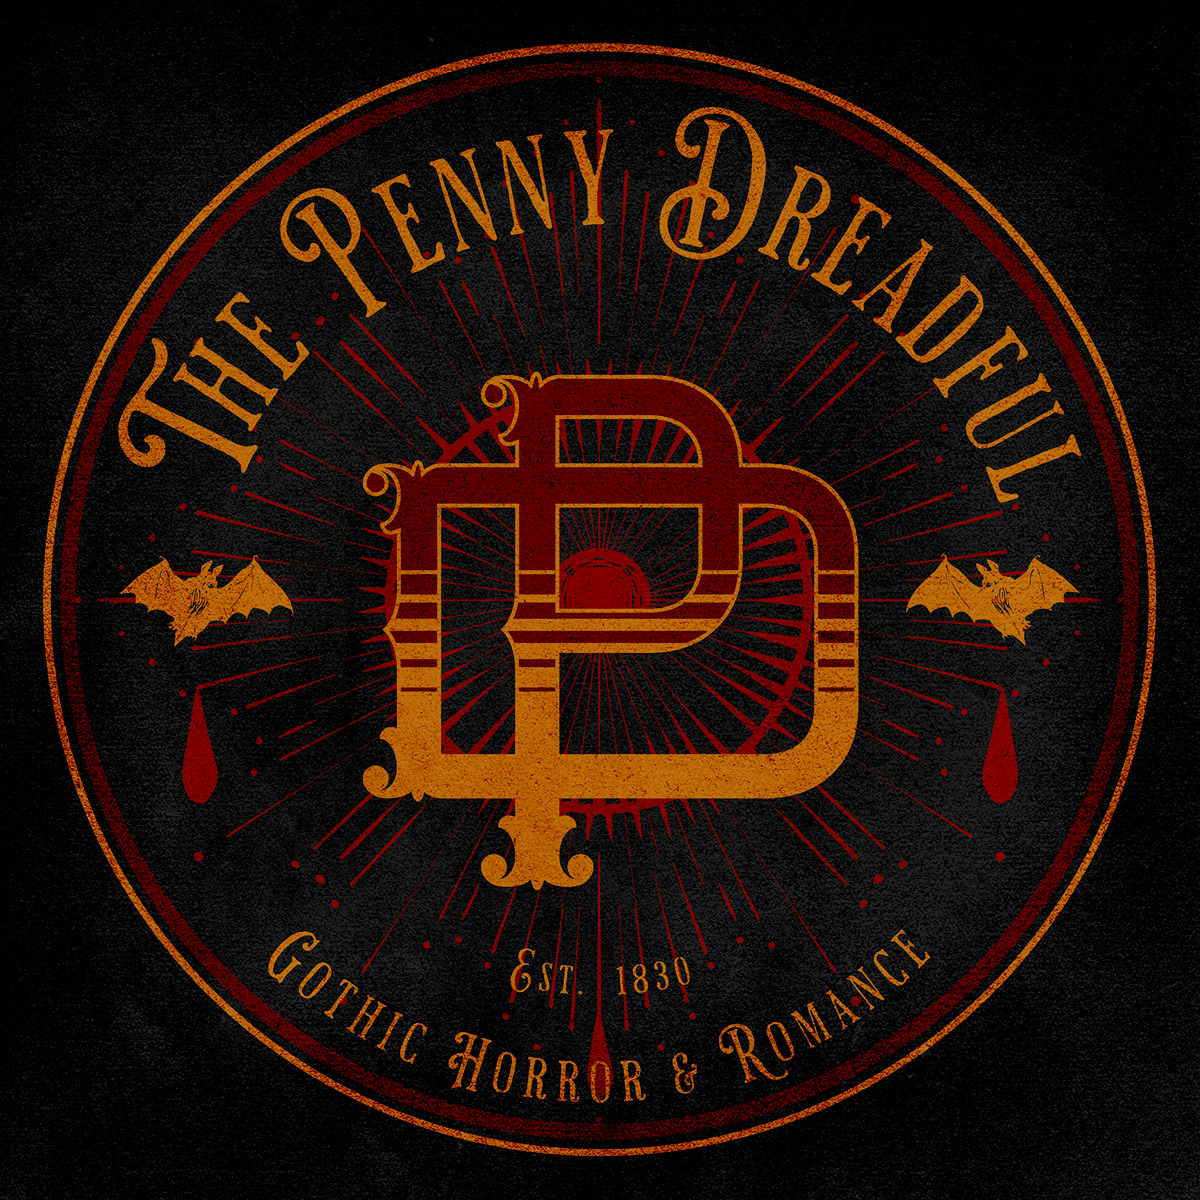 The Penny Dreadful